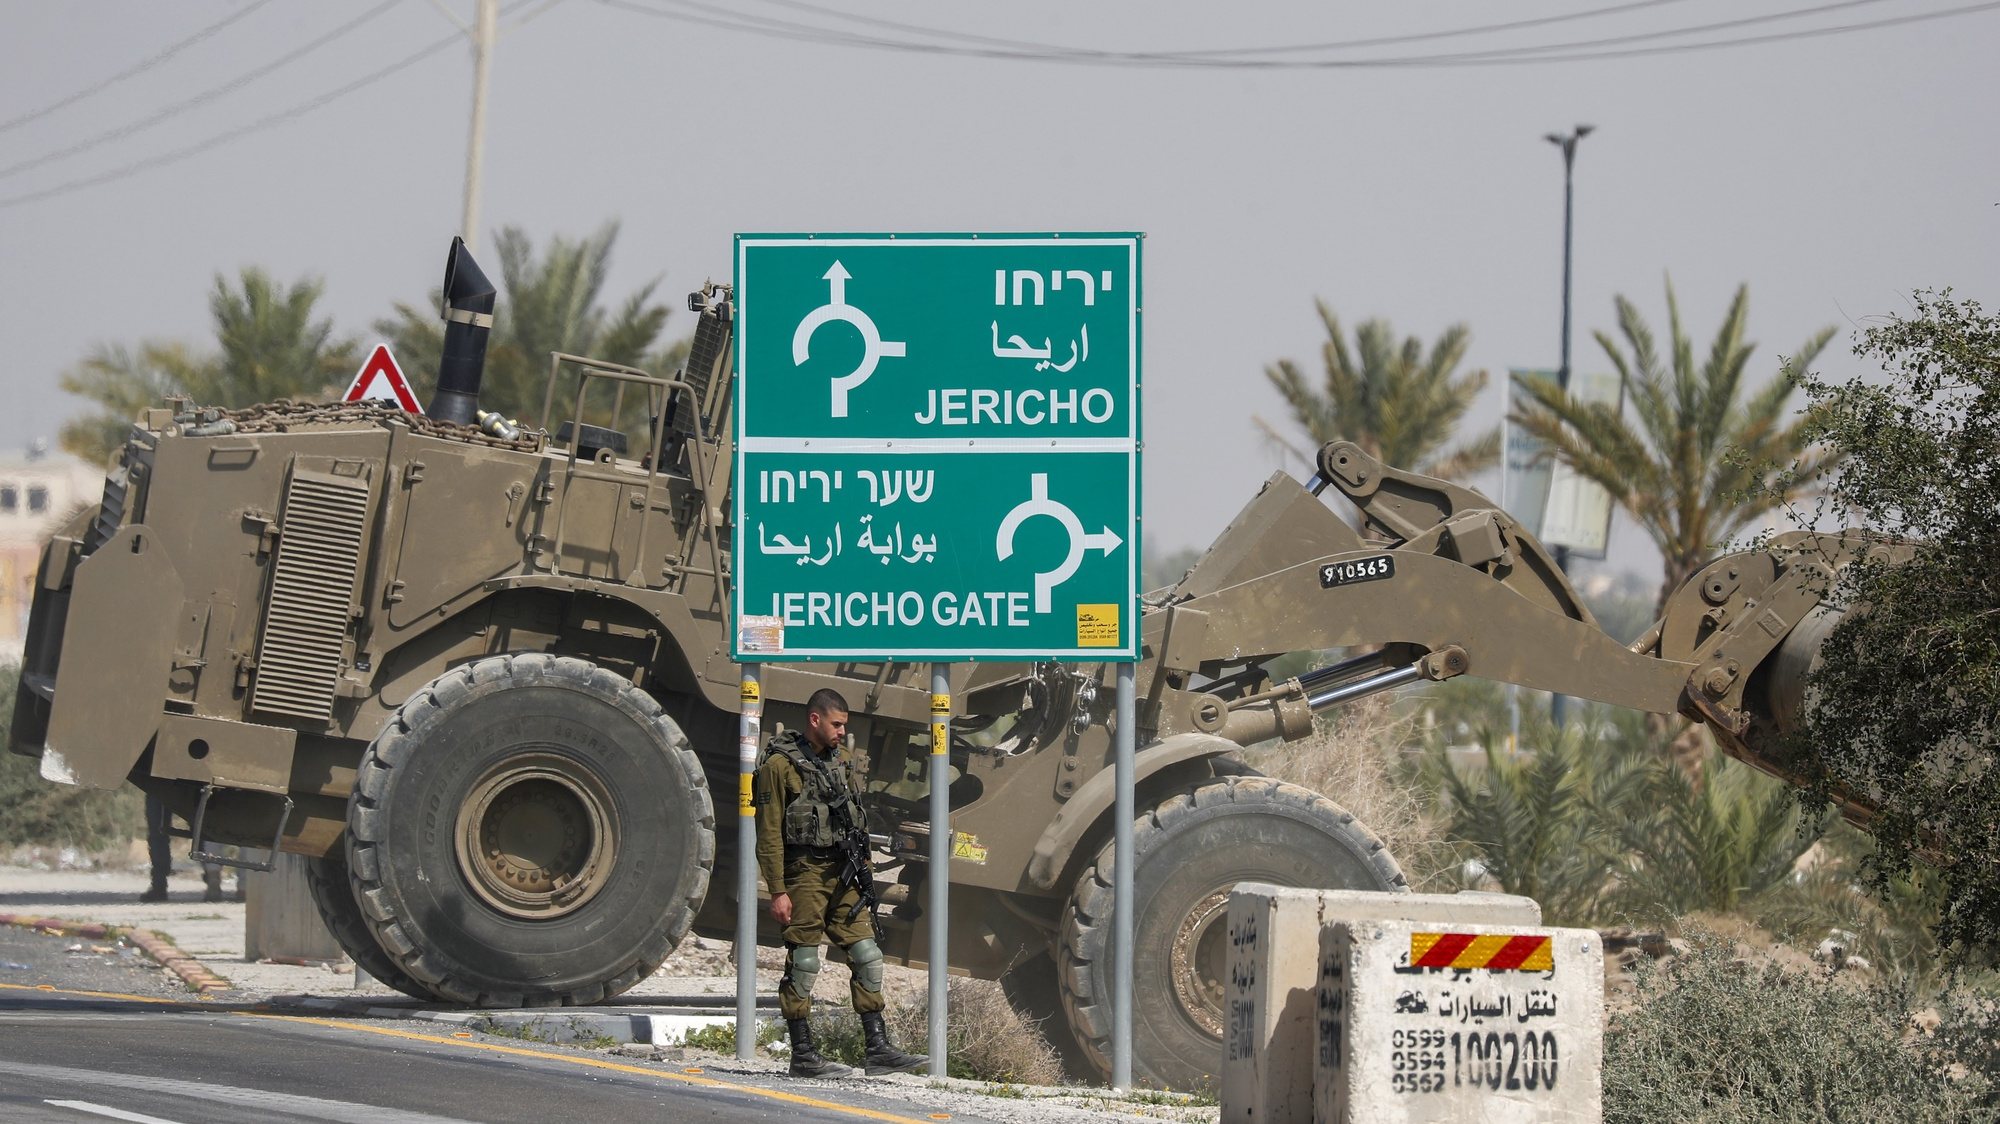 epa10495398 An Israeli military bulldozer blocks a road leading to the West Bank city of Jericho, 28 February 2023, as Israeli forces tighten security in the area. Israeli authorities said that an Israeli-American motorist was killed in a shooting attack by suspected Palestinian gunmen on Highway 90 near Jericho late 27 February. Israeli security forces have been conducting searches in the area and set up road blocks and checkpoints as they continue a manhunt for a number of attackers who killed three Israelis in recent shooting attacks in the West Bank.  EPA/ATEF SAFADI